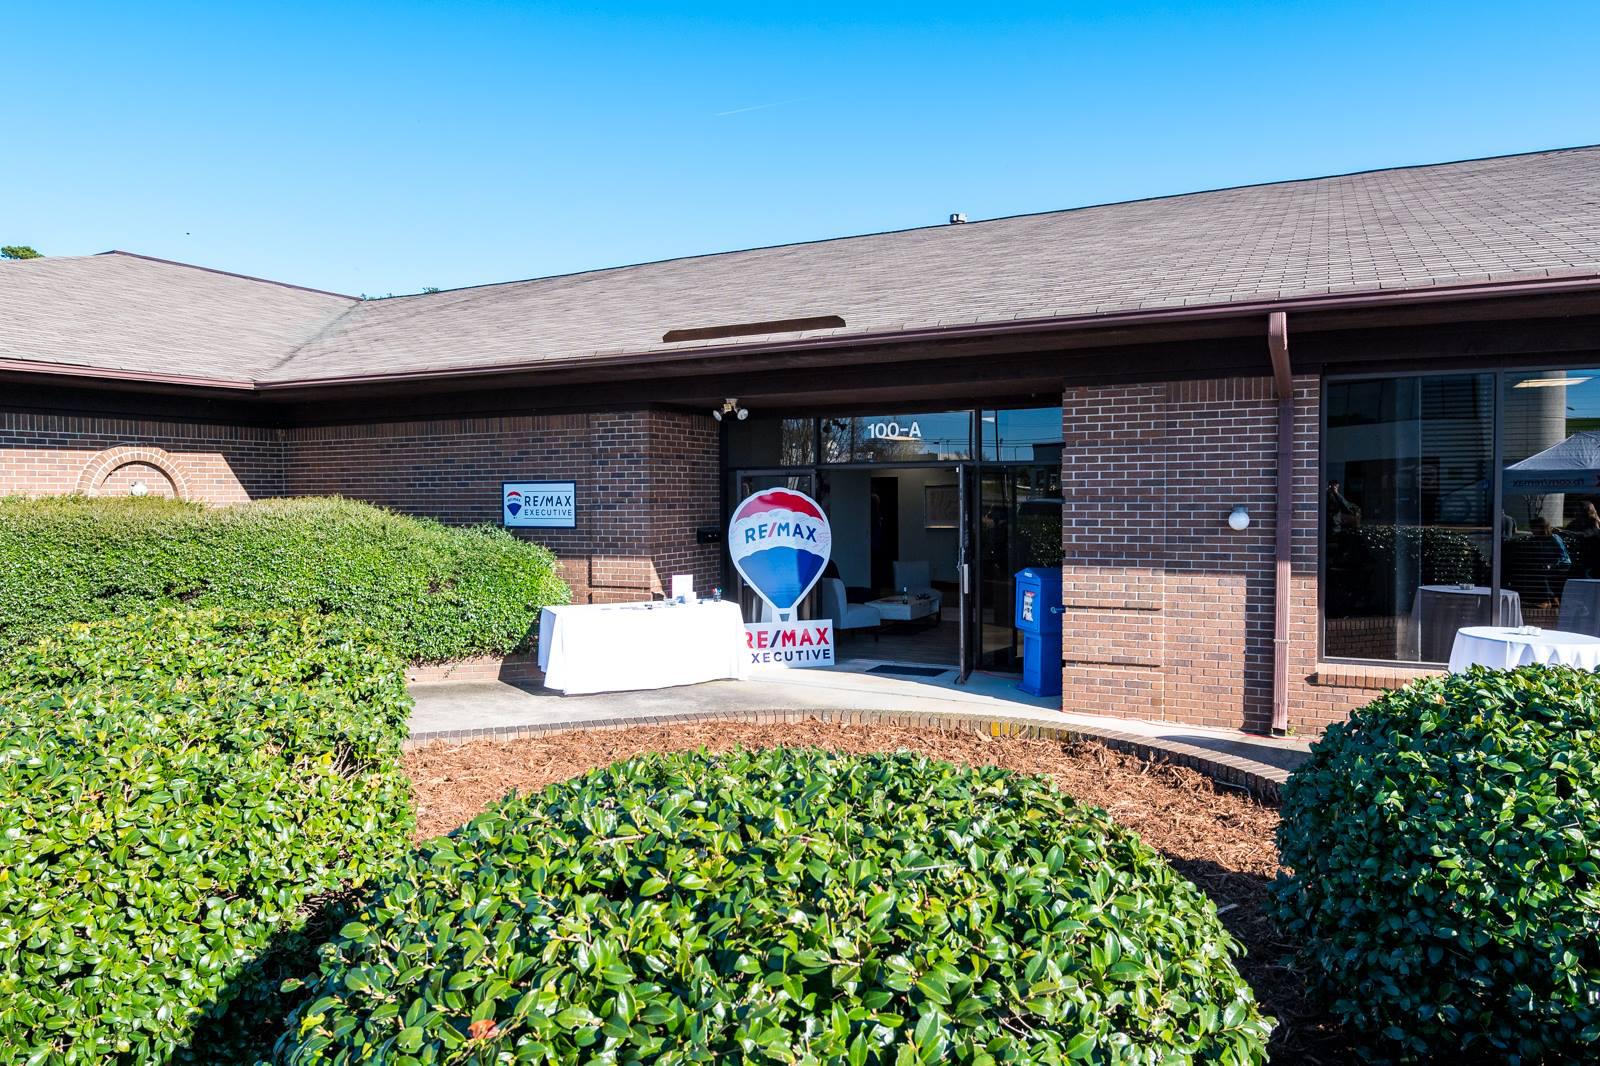 RE/MAX Executive 100 Miracle Mile Dr, Anderson, SC 29621 - YP.com